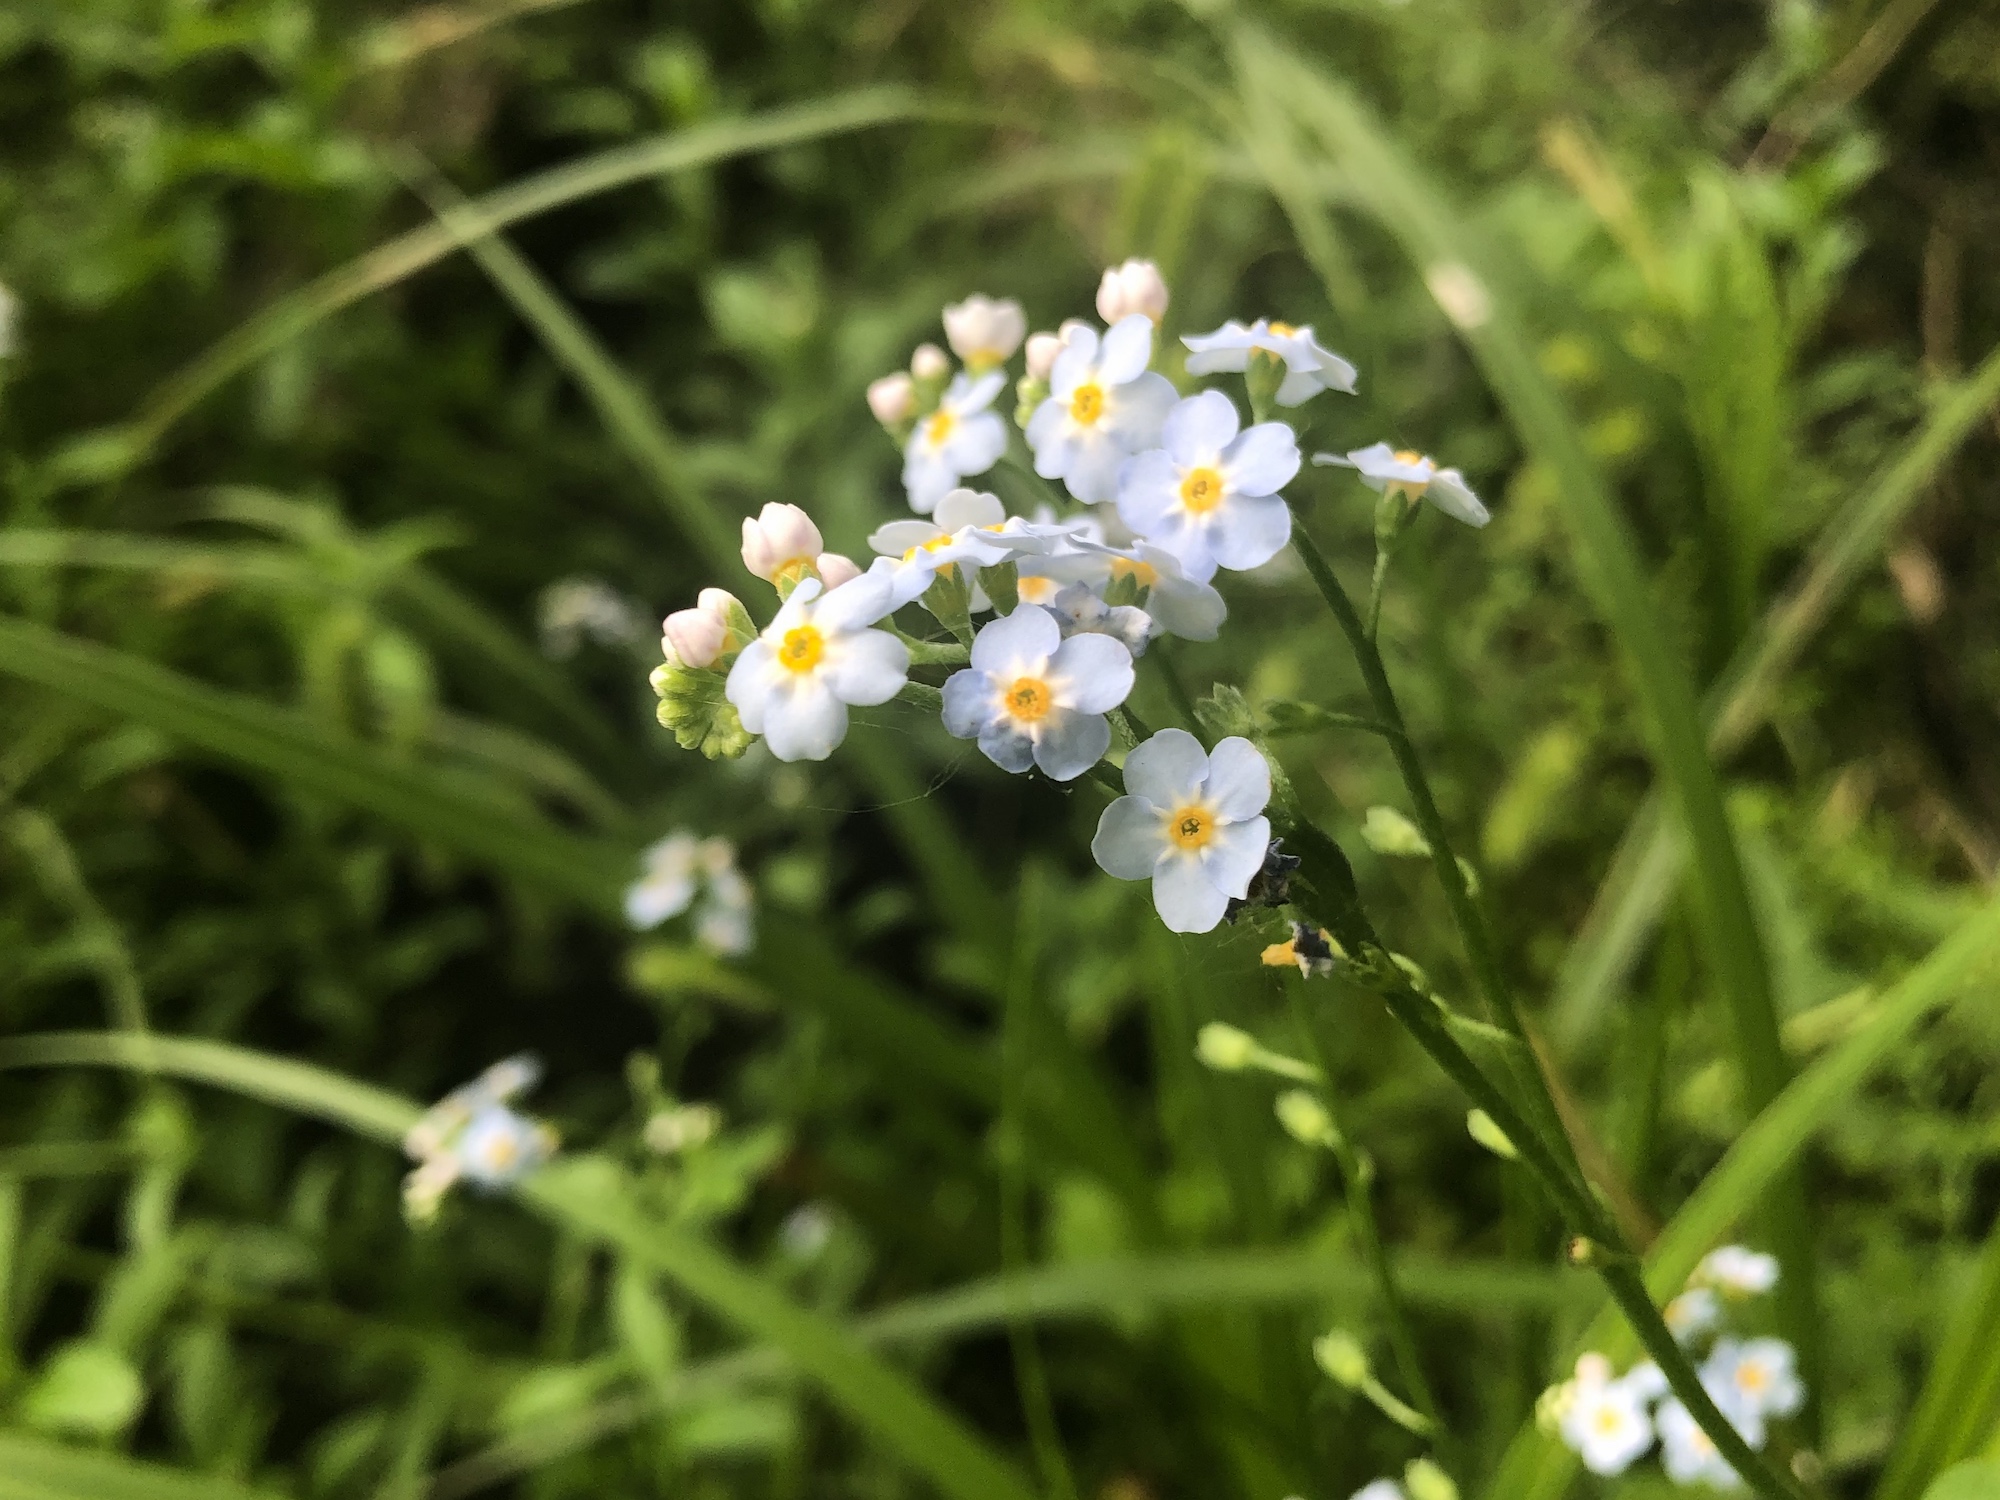 True Forget-me-not near cattails at Pickford Street stormwater outflow into Lake Wingra in Madison, Wisconsin on June 9, 2020.